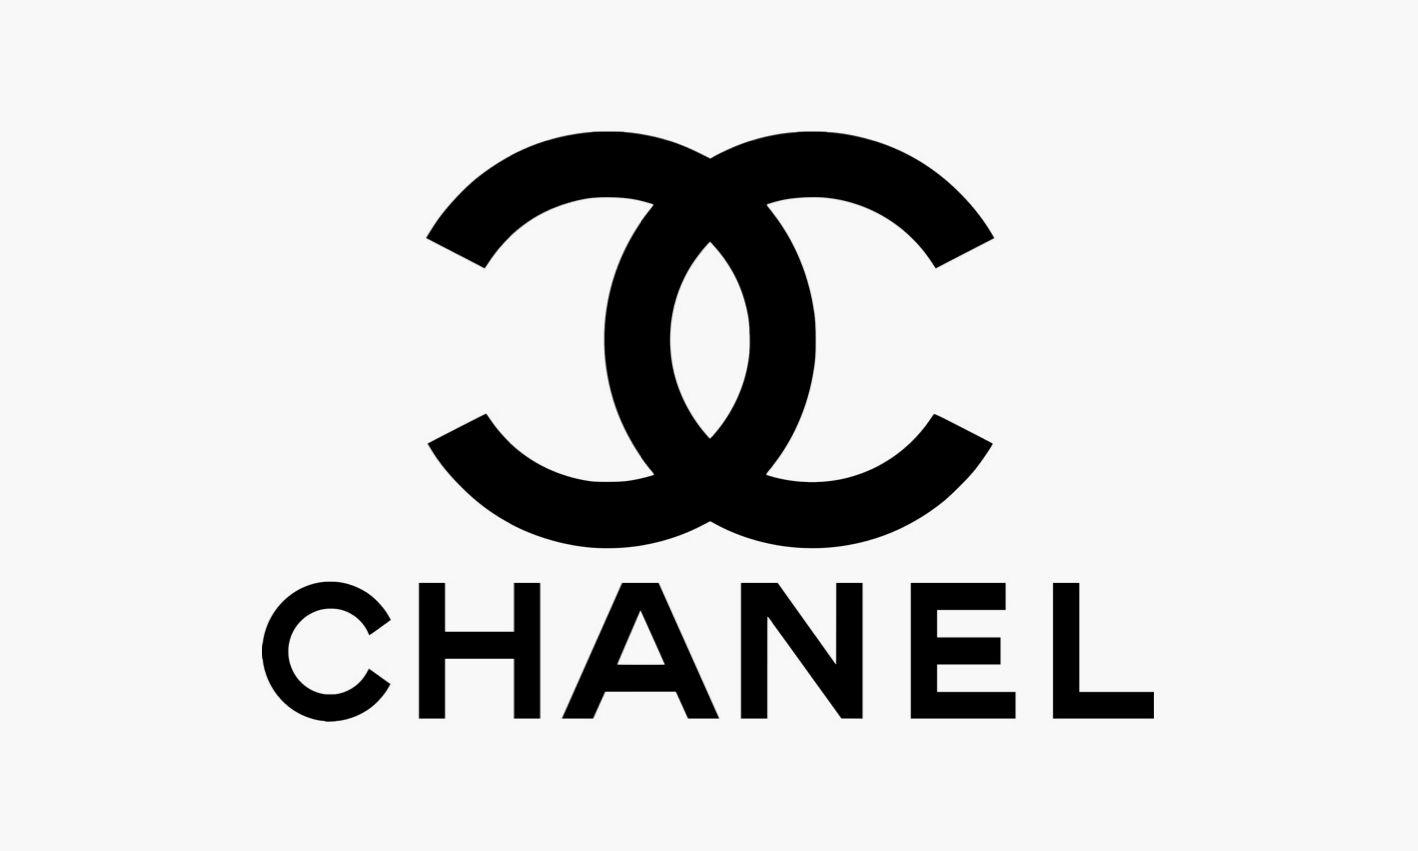 Well Known Logo - The Inspirations Behind 20 of the Most Well-Known Luxury Brand Logos ...